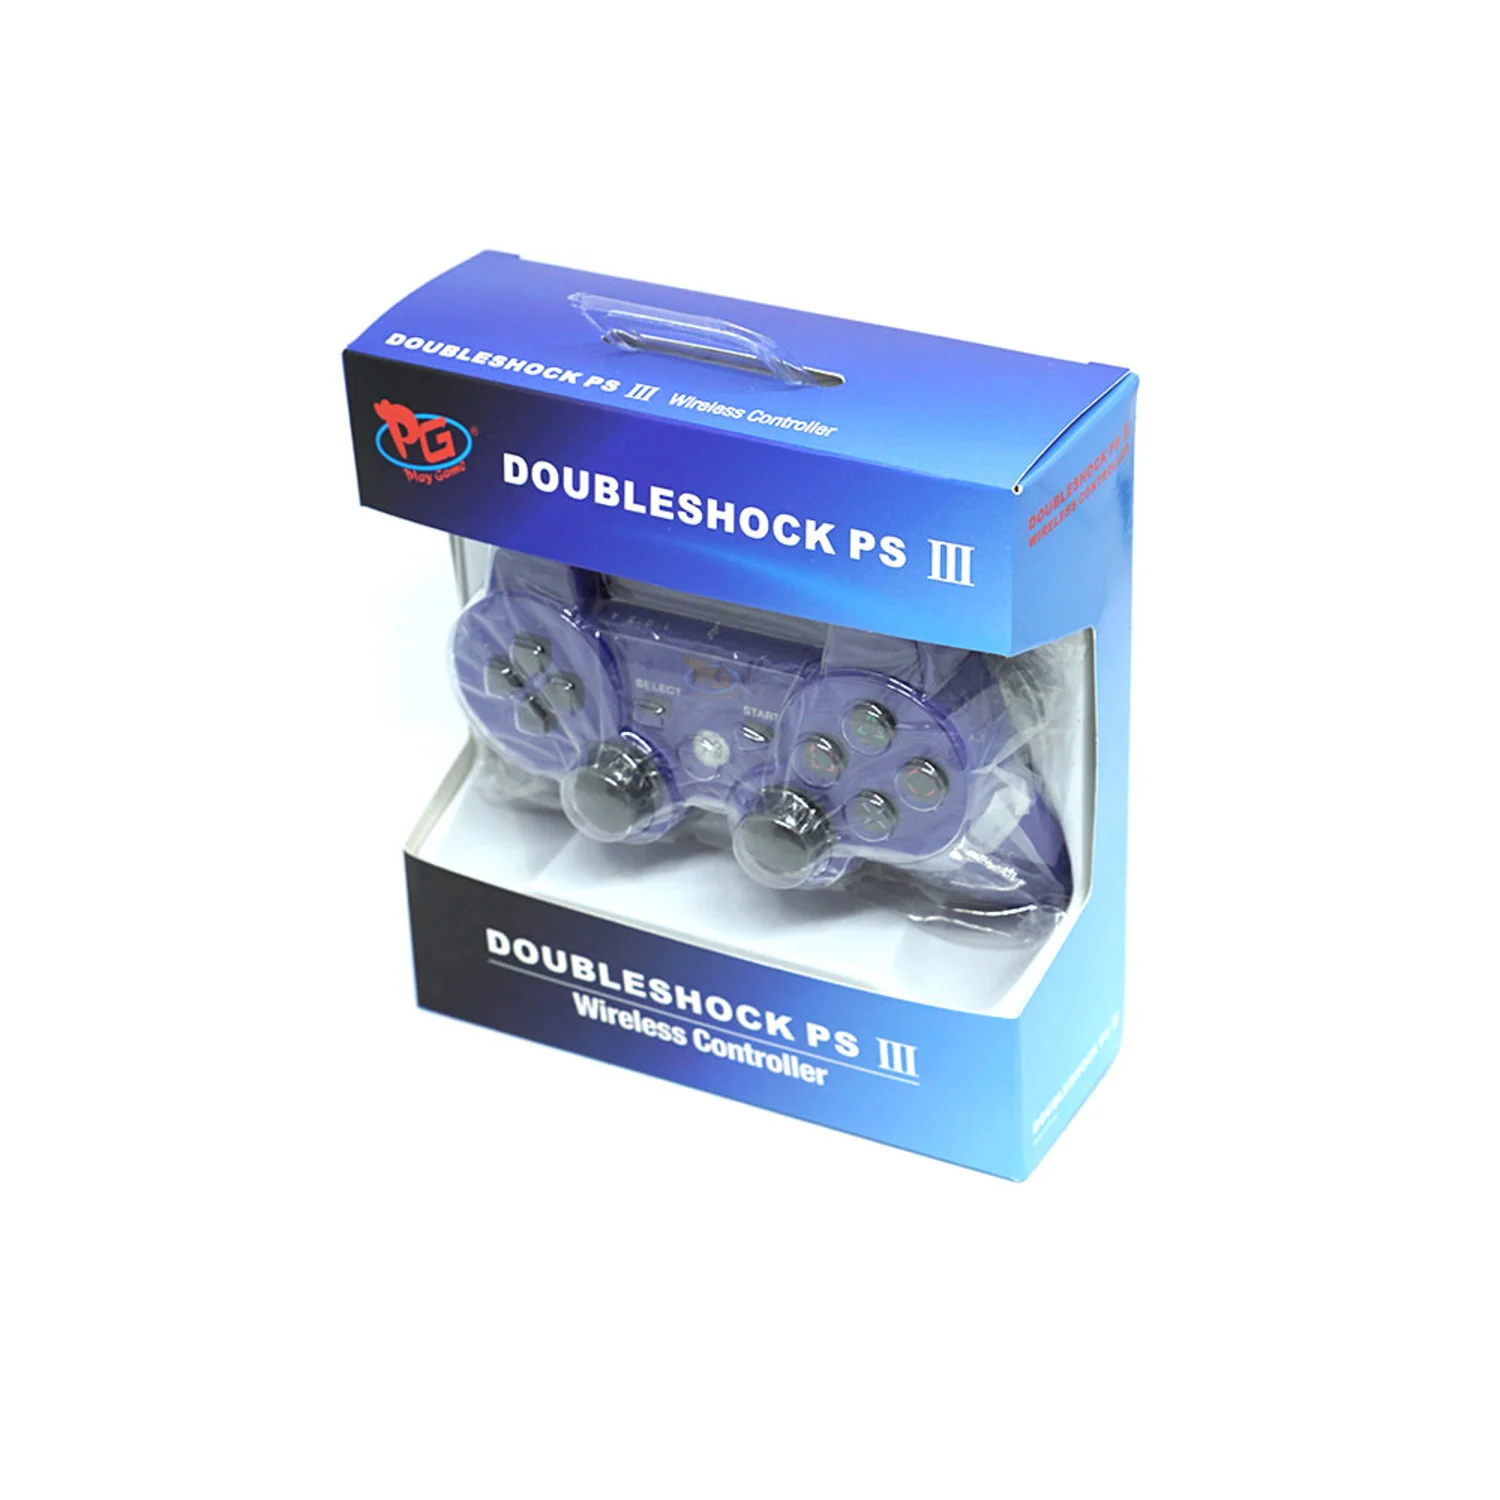 Controle Play Game Doubleshock 3 para PS3 - Azul